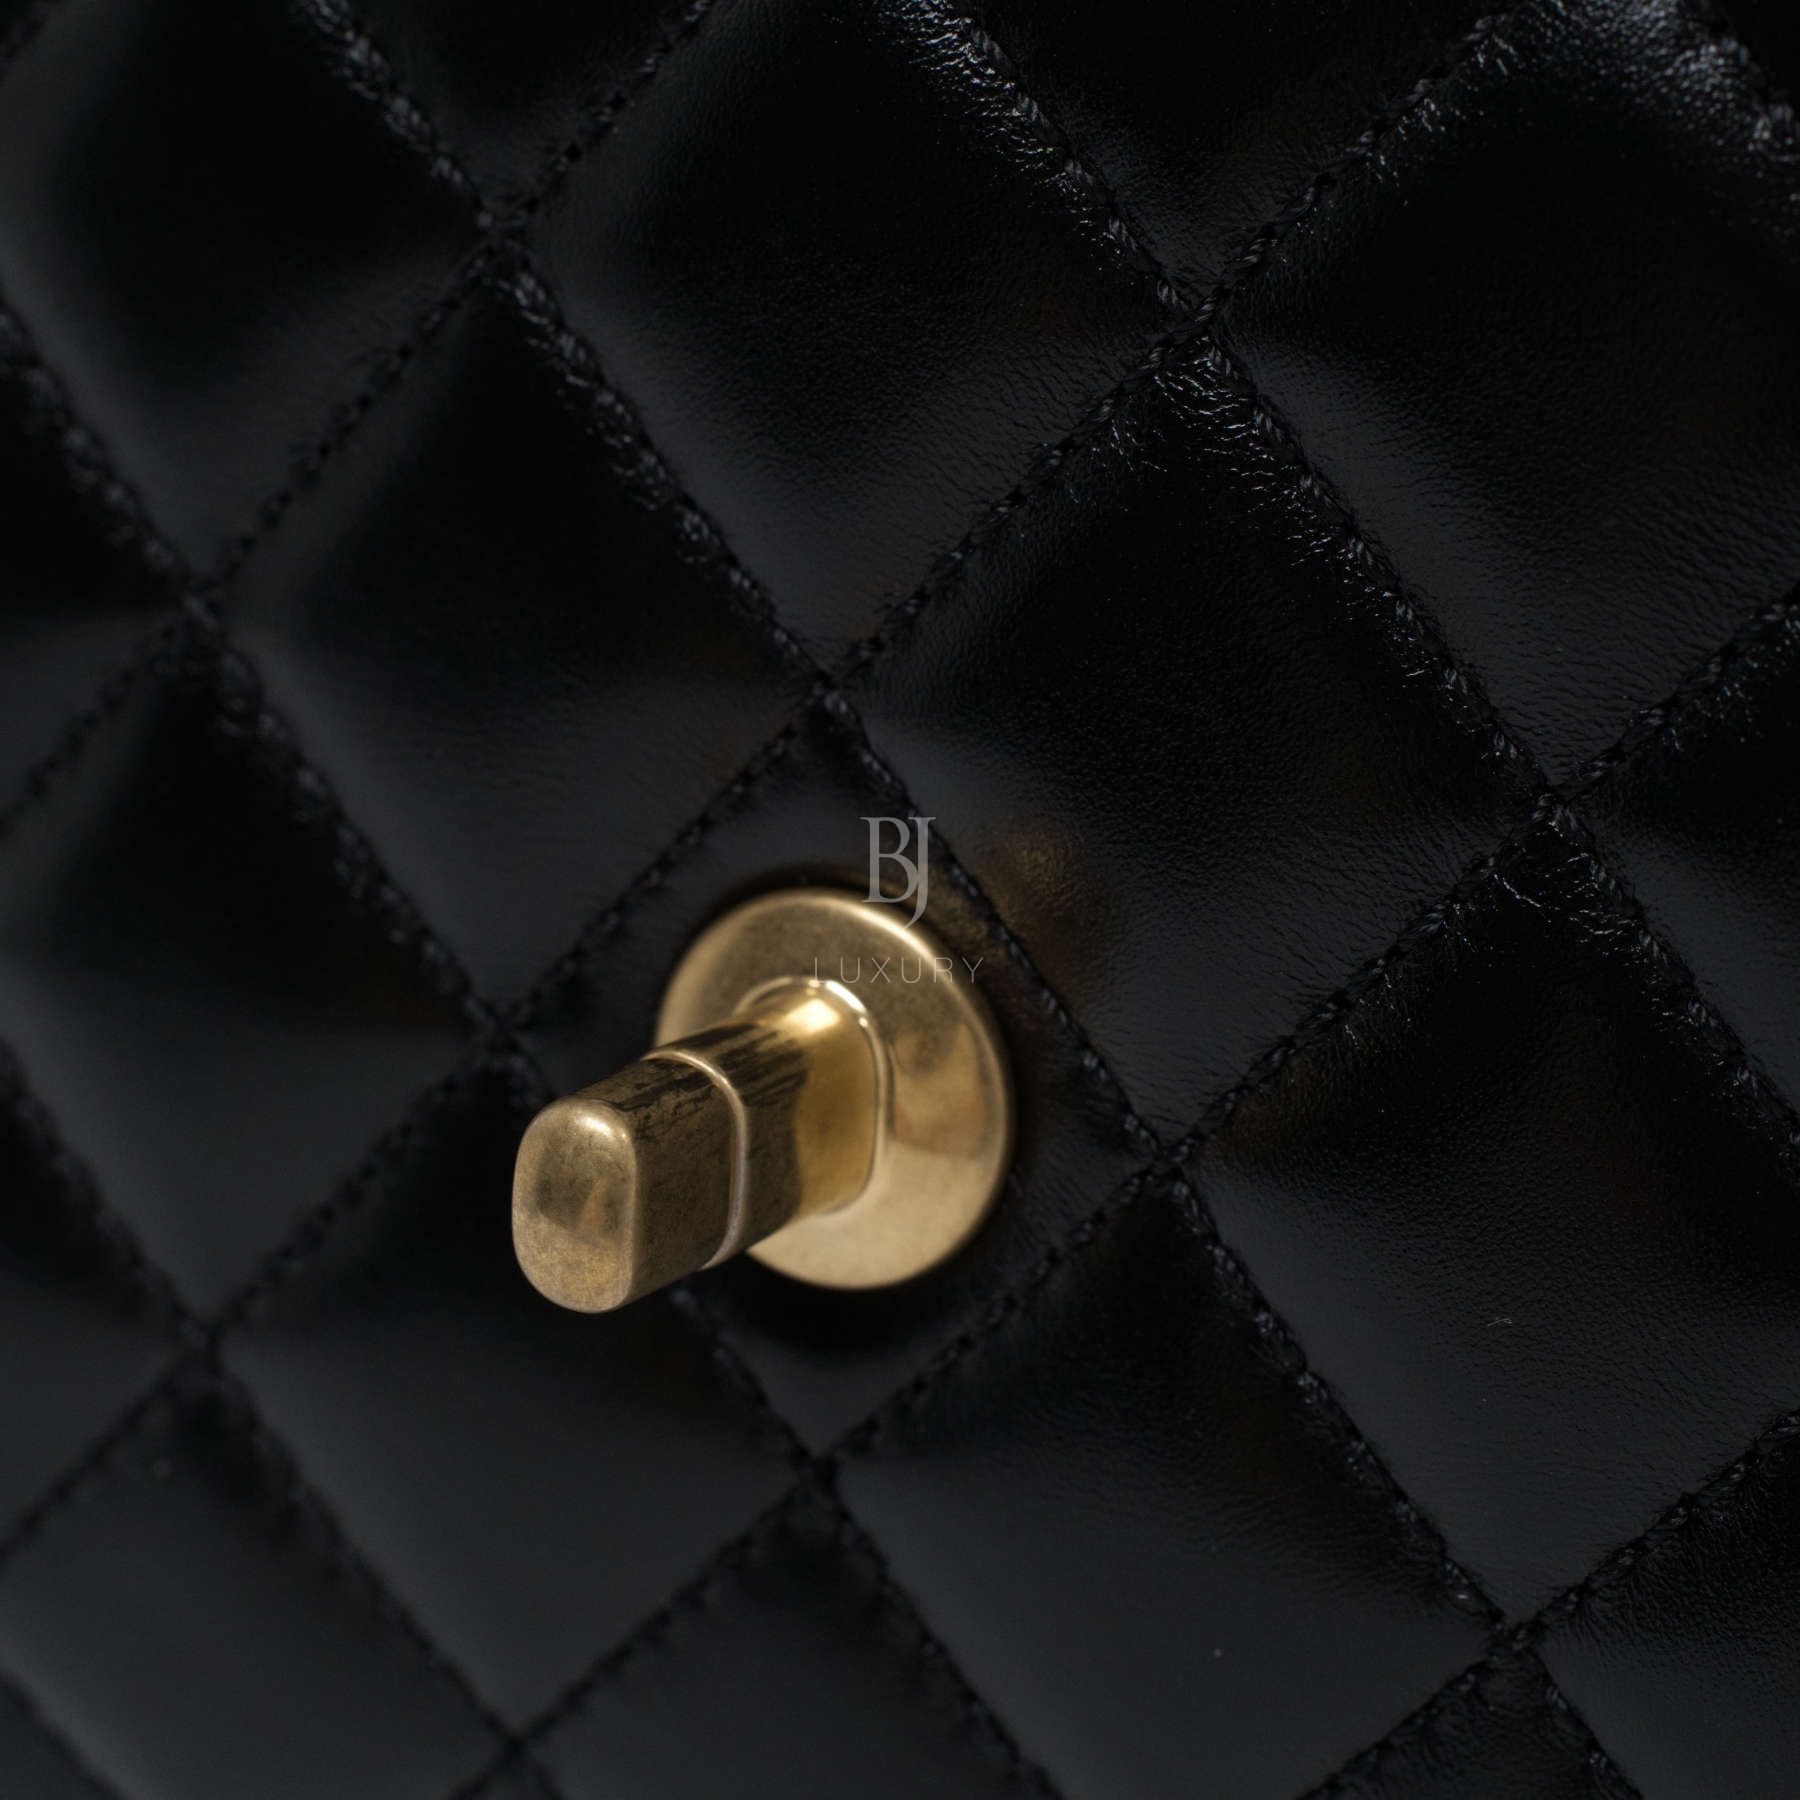 CHANEL-COCOHANDLE-SMALL-BLACK-LAMBSKIN-4134 hw clasp.jpg